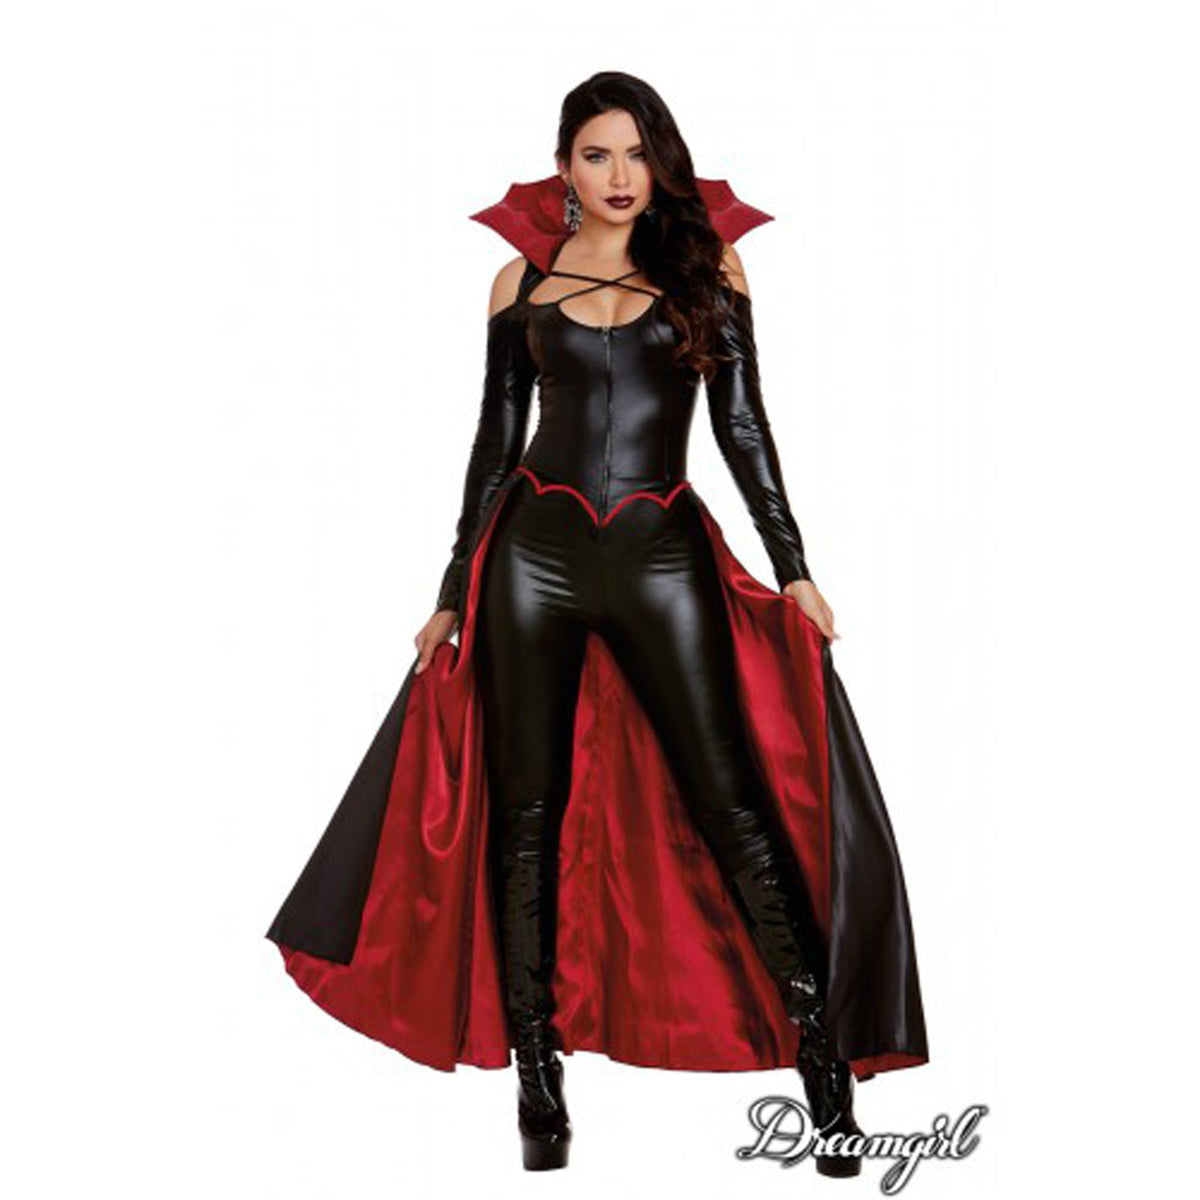 IMPORTATIONS JOLARSPECK INC Costumes Princess of Darkness Costume for Plus Size Adults